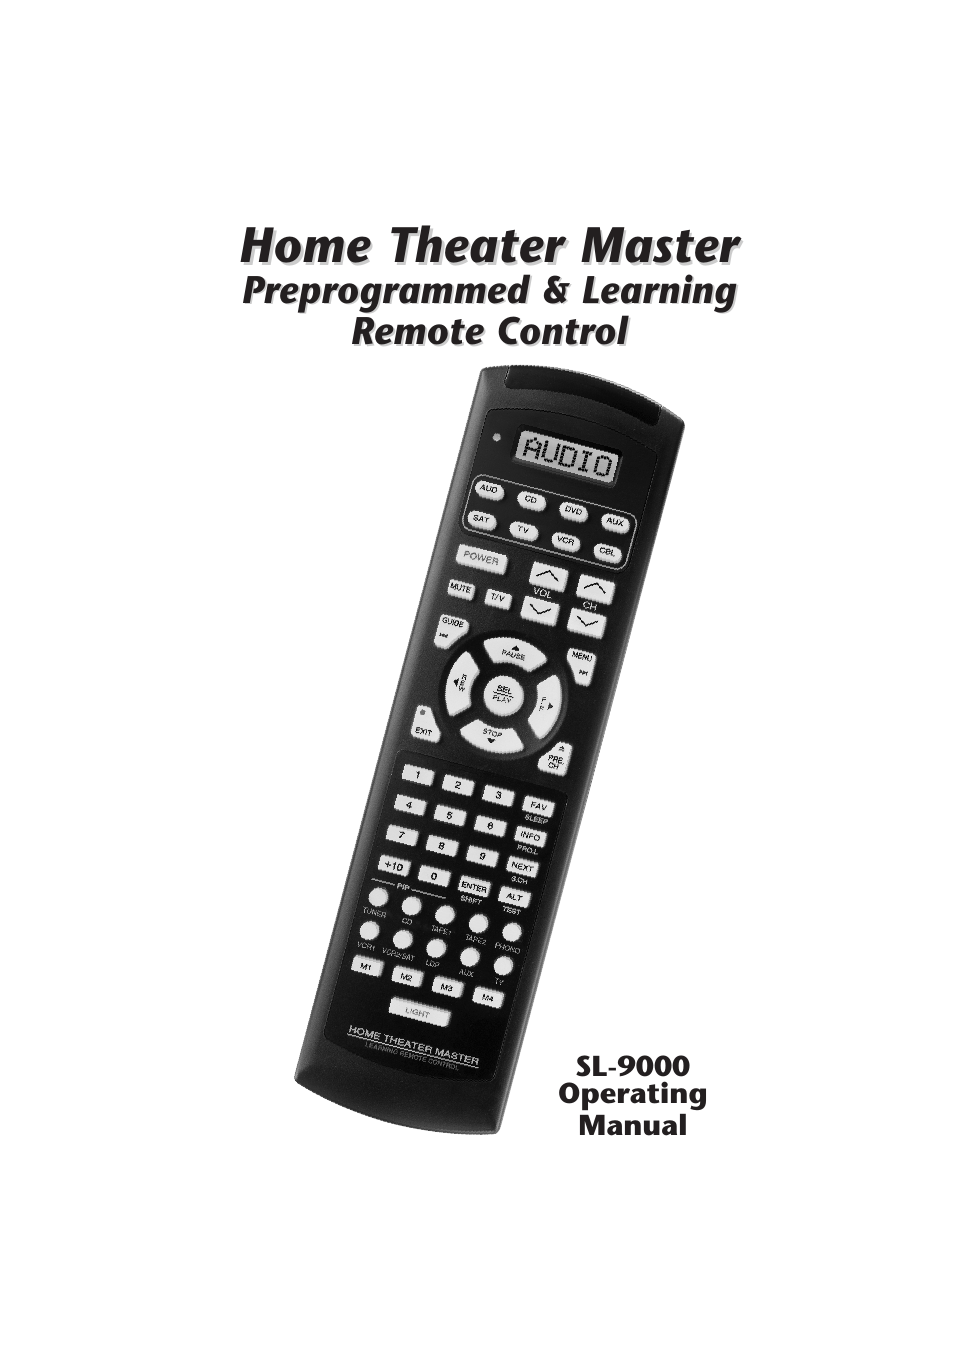 Home Theater Master SL-9000